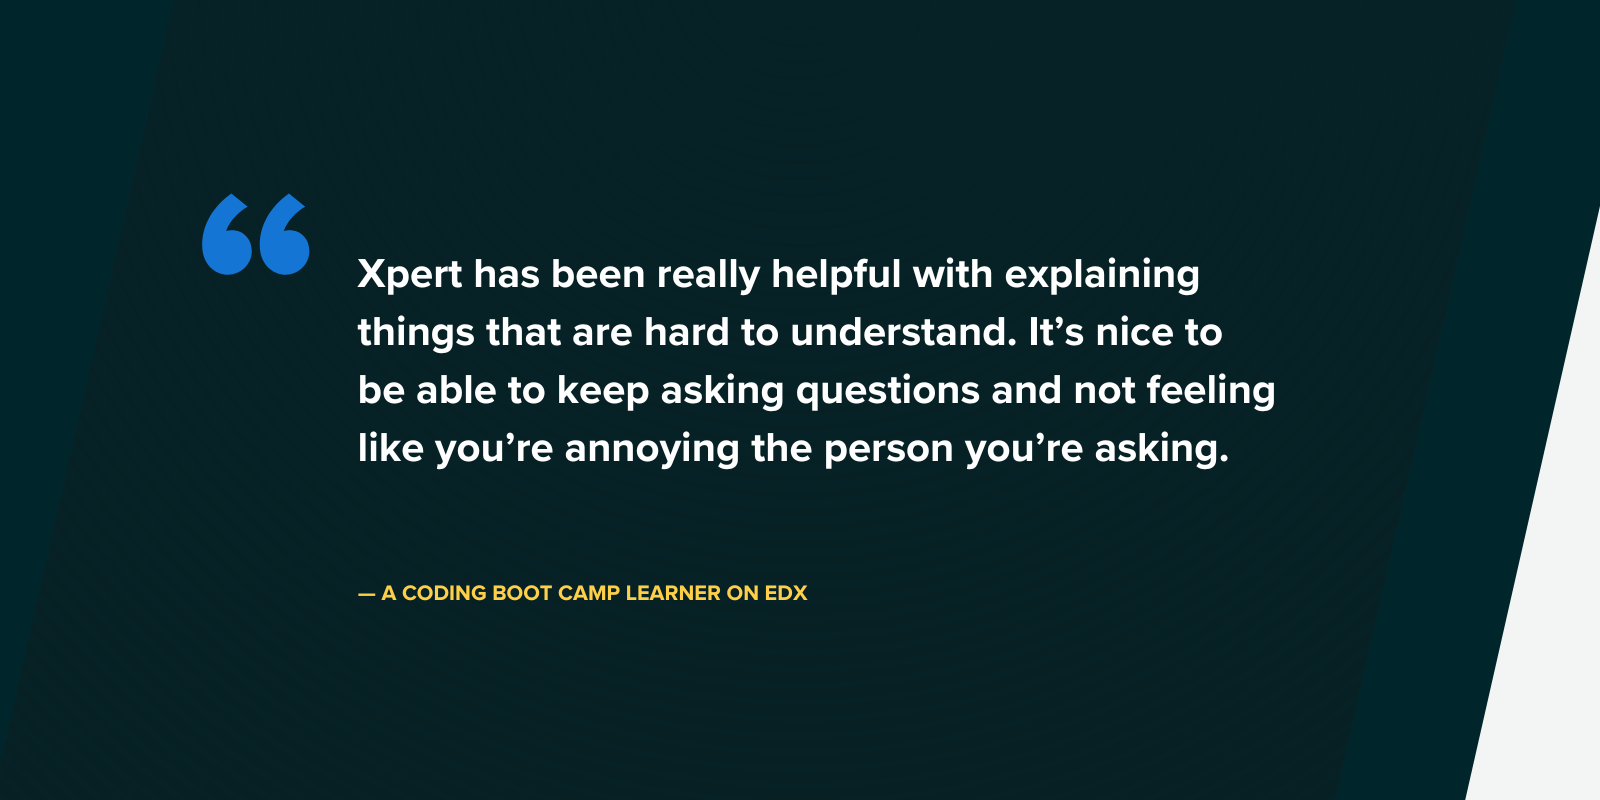 AI quote - BOOT CAMP LEARNER - XPERT